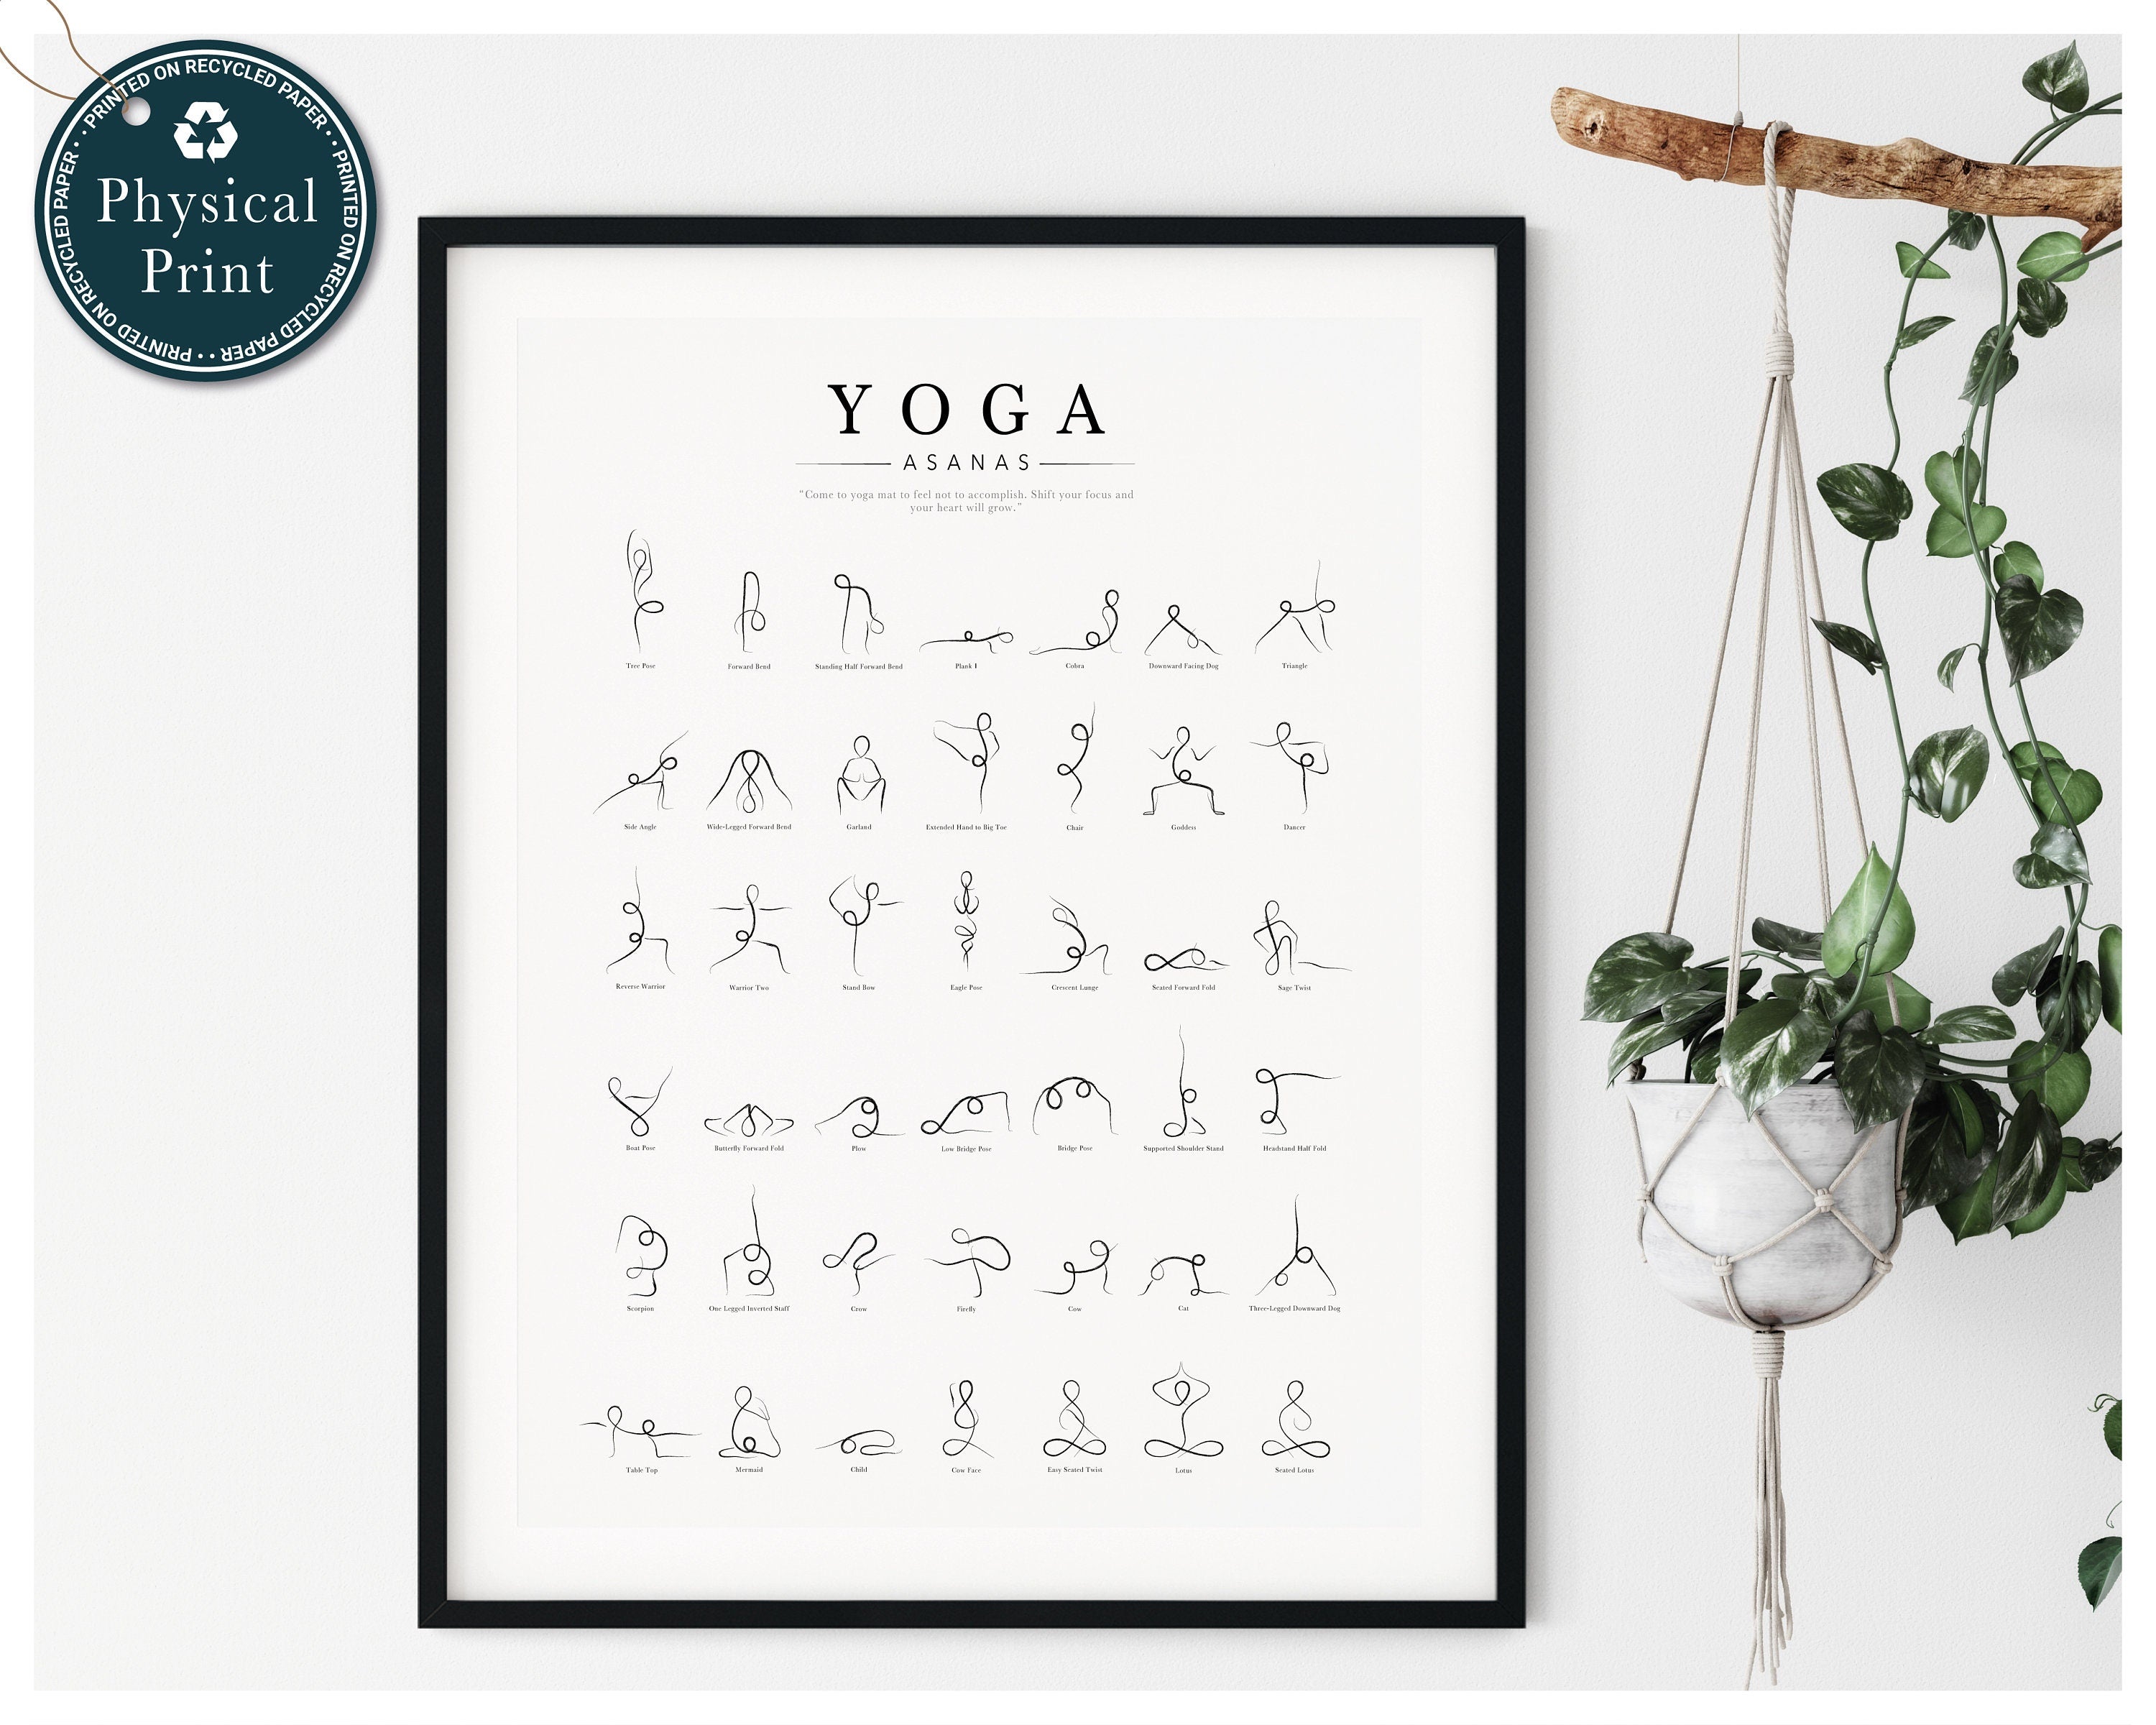 Hot Yoga Tapestry and Sequence Tutorial /3 'x4' Asana Poster Made of  Microfiber/Good for Yoga Room/Basic Yoga asana/Yoga Studio Wall Decor :  Amazon.in: Sports, Fitness & Outdoors